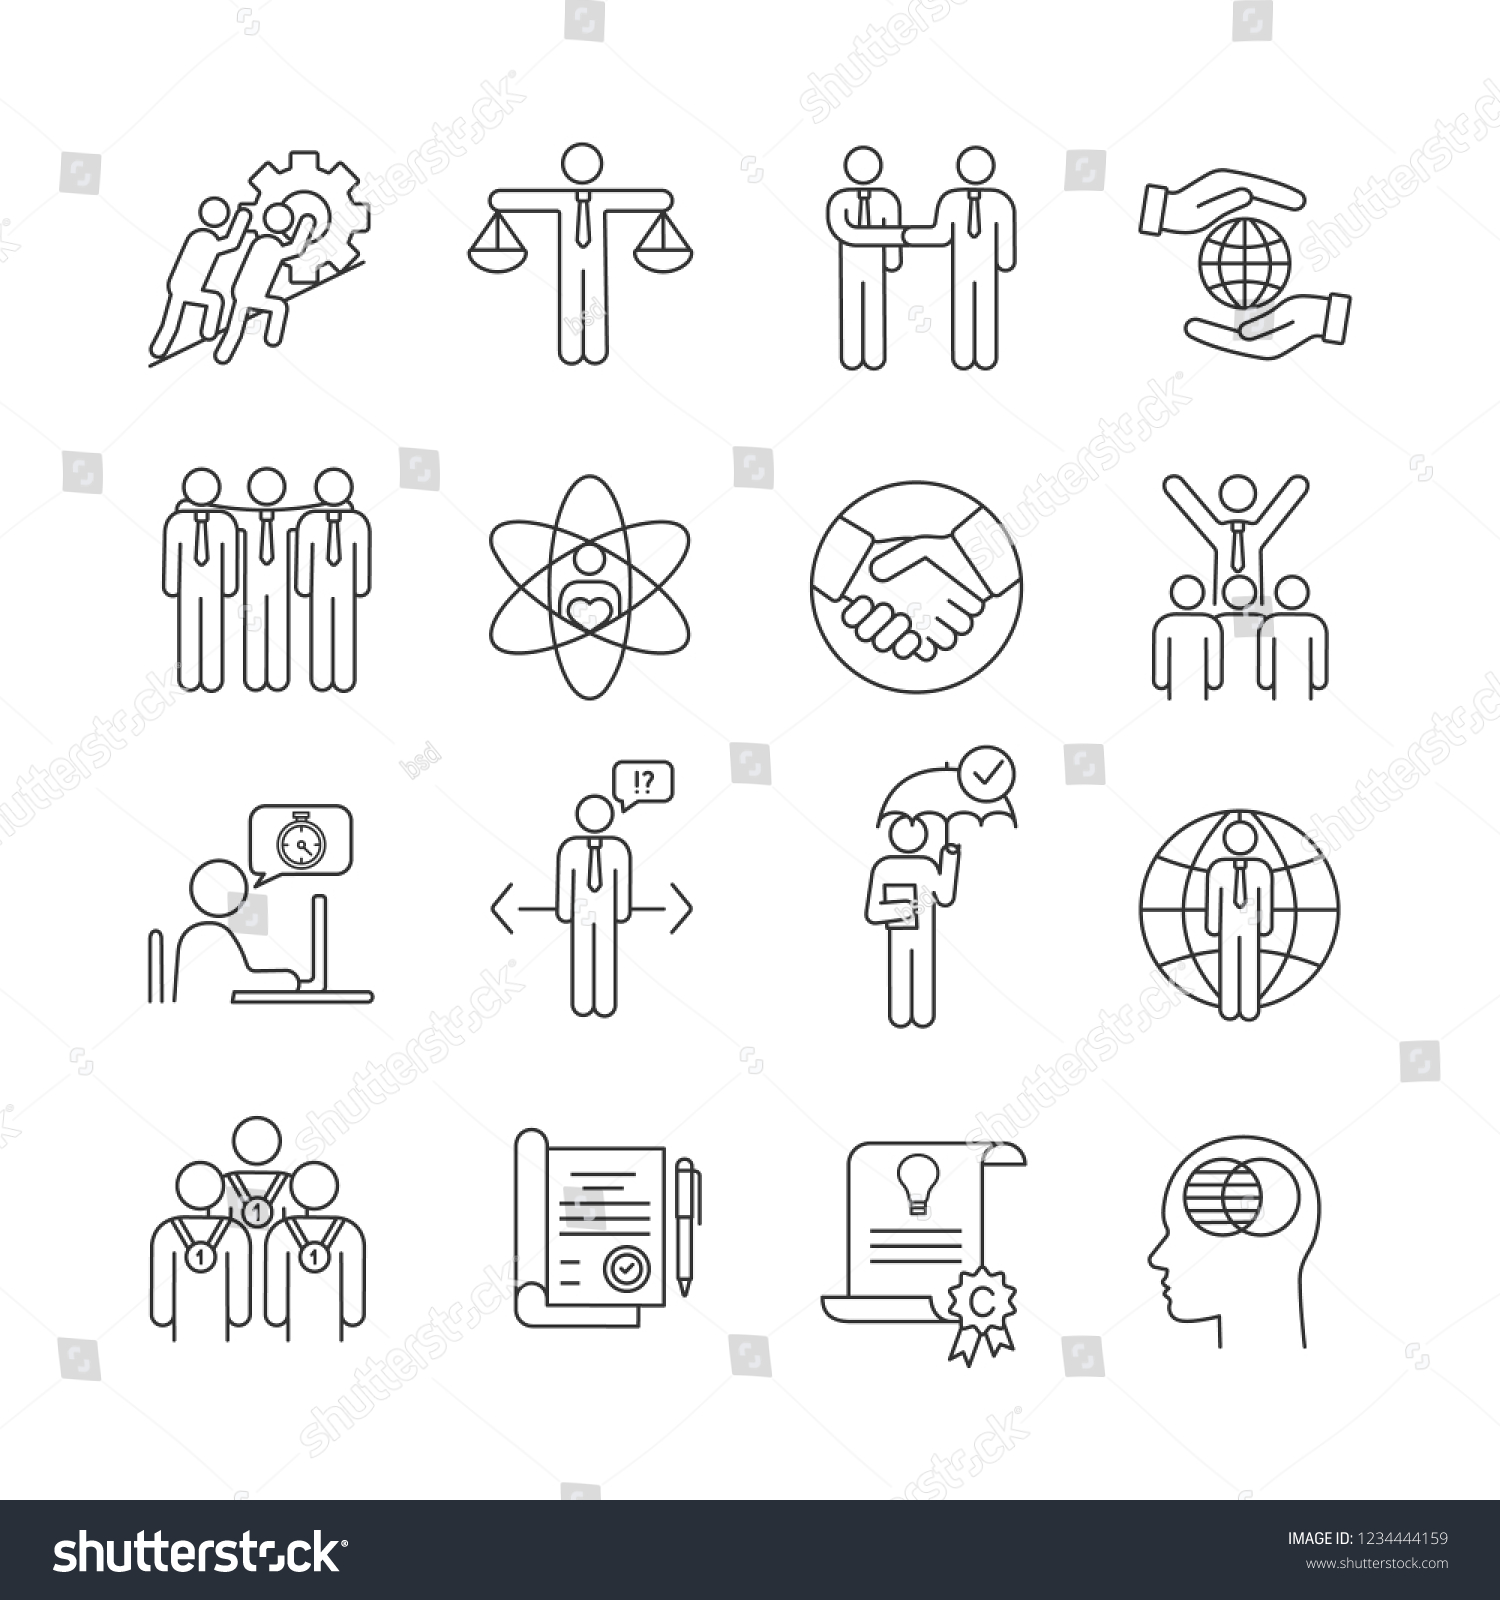 Business Ethics Linear Icons Set Business Stock Vector Royalty Free Shutterstock